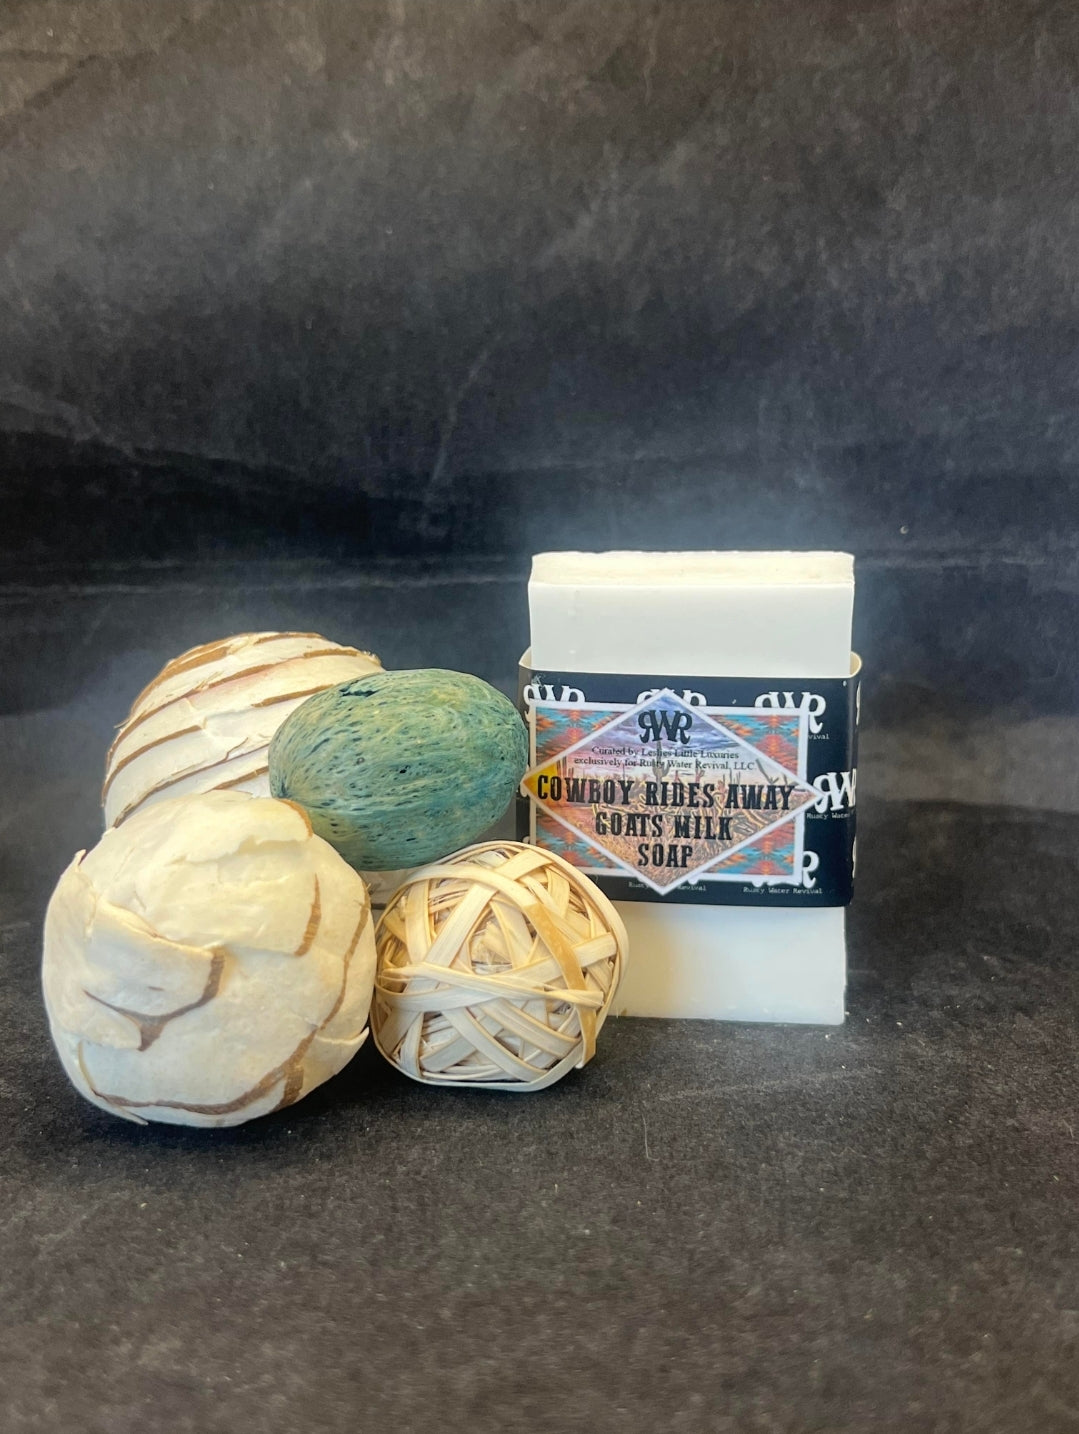 The Cowboy Rides Away Wooden Wick Jar Candle, Wax Melts, Spray & Soap